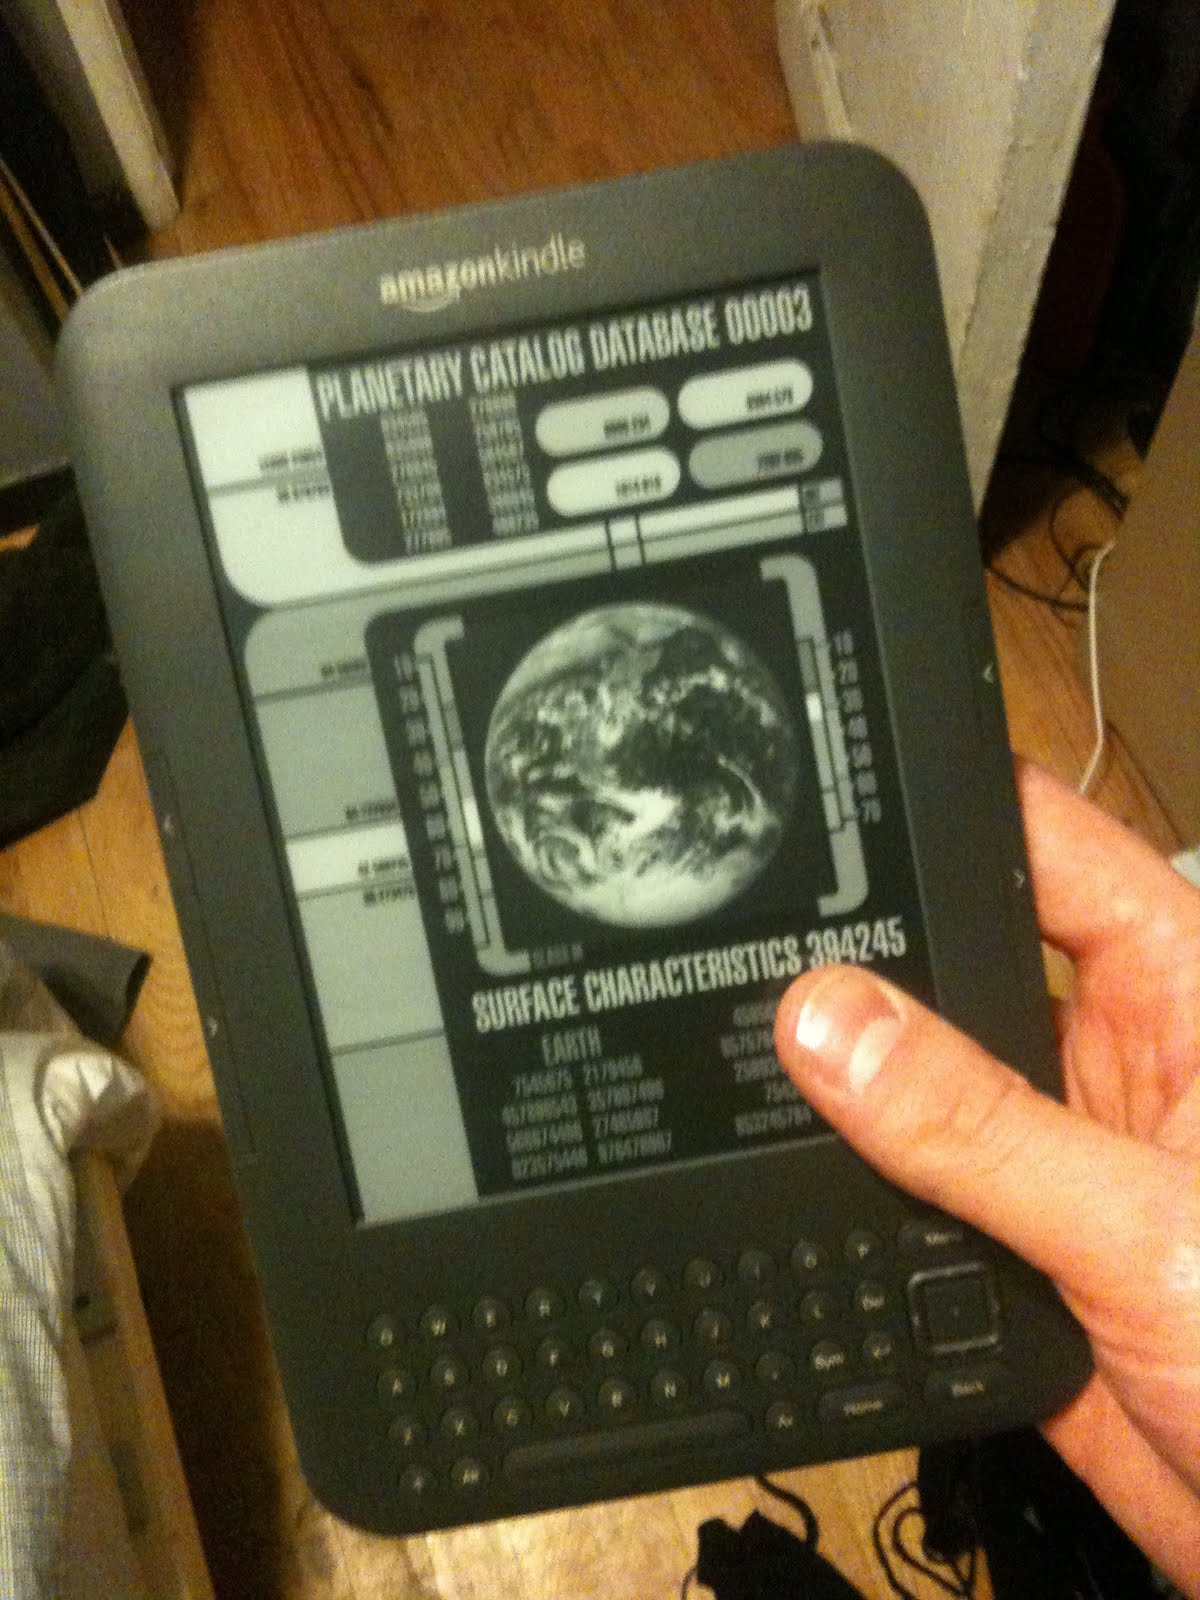 The Kindle goes to sleep normally but for some reason It does not display custom  screensavers so the screen keeps the last displayed image.